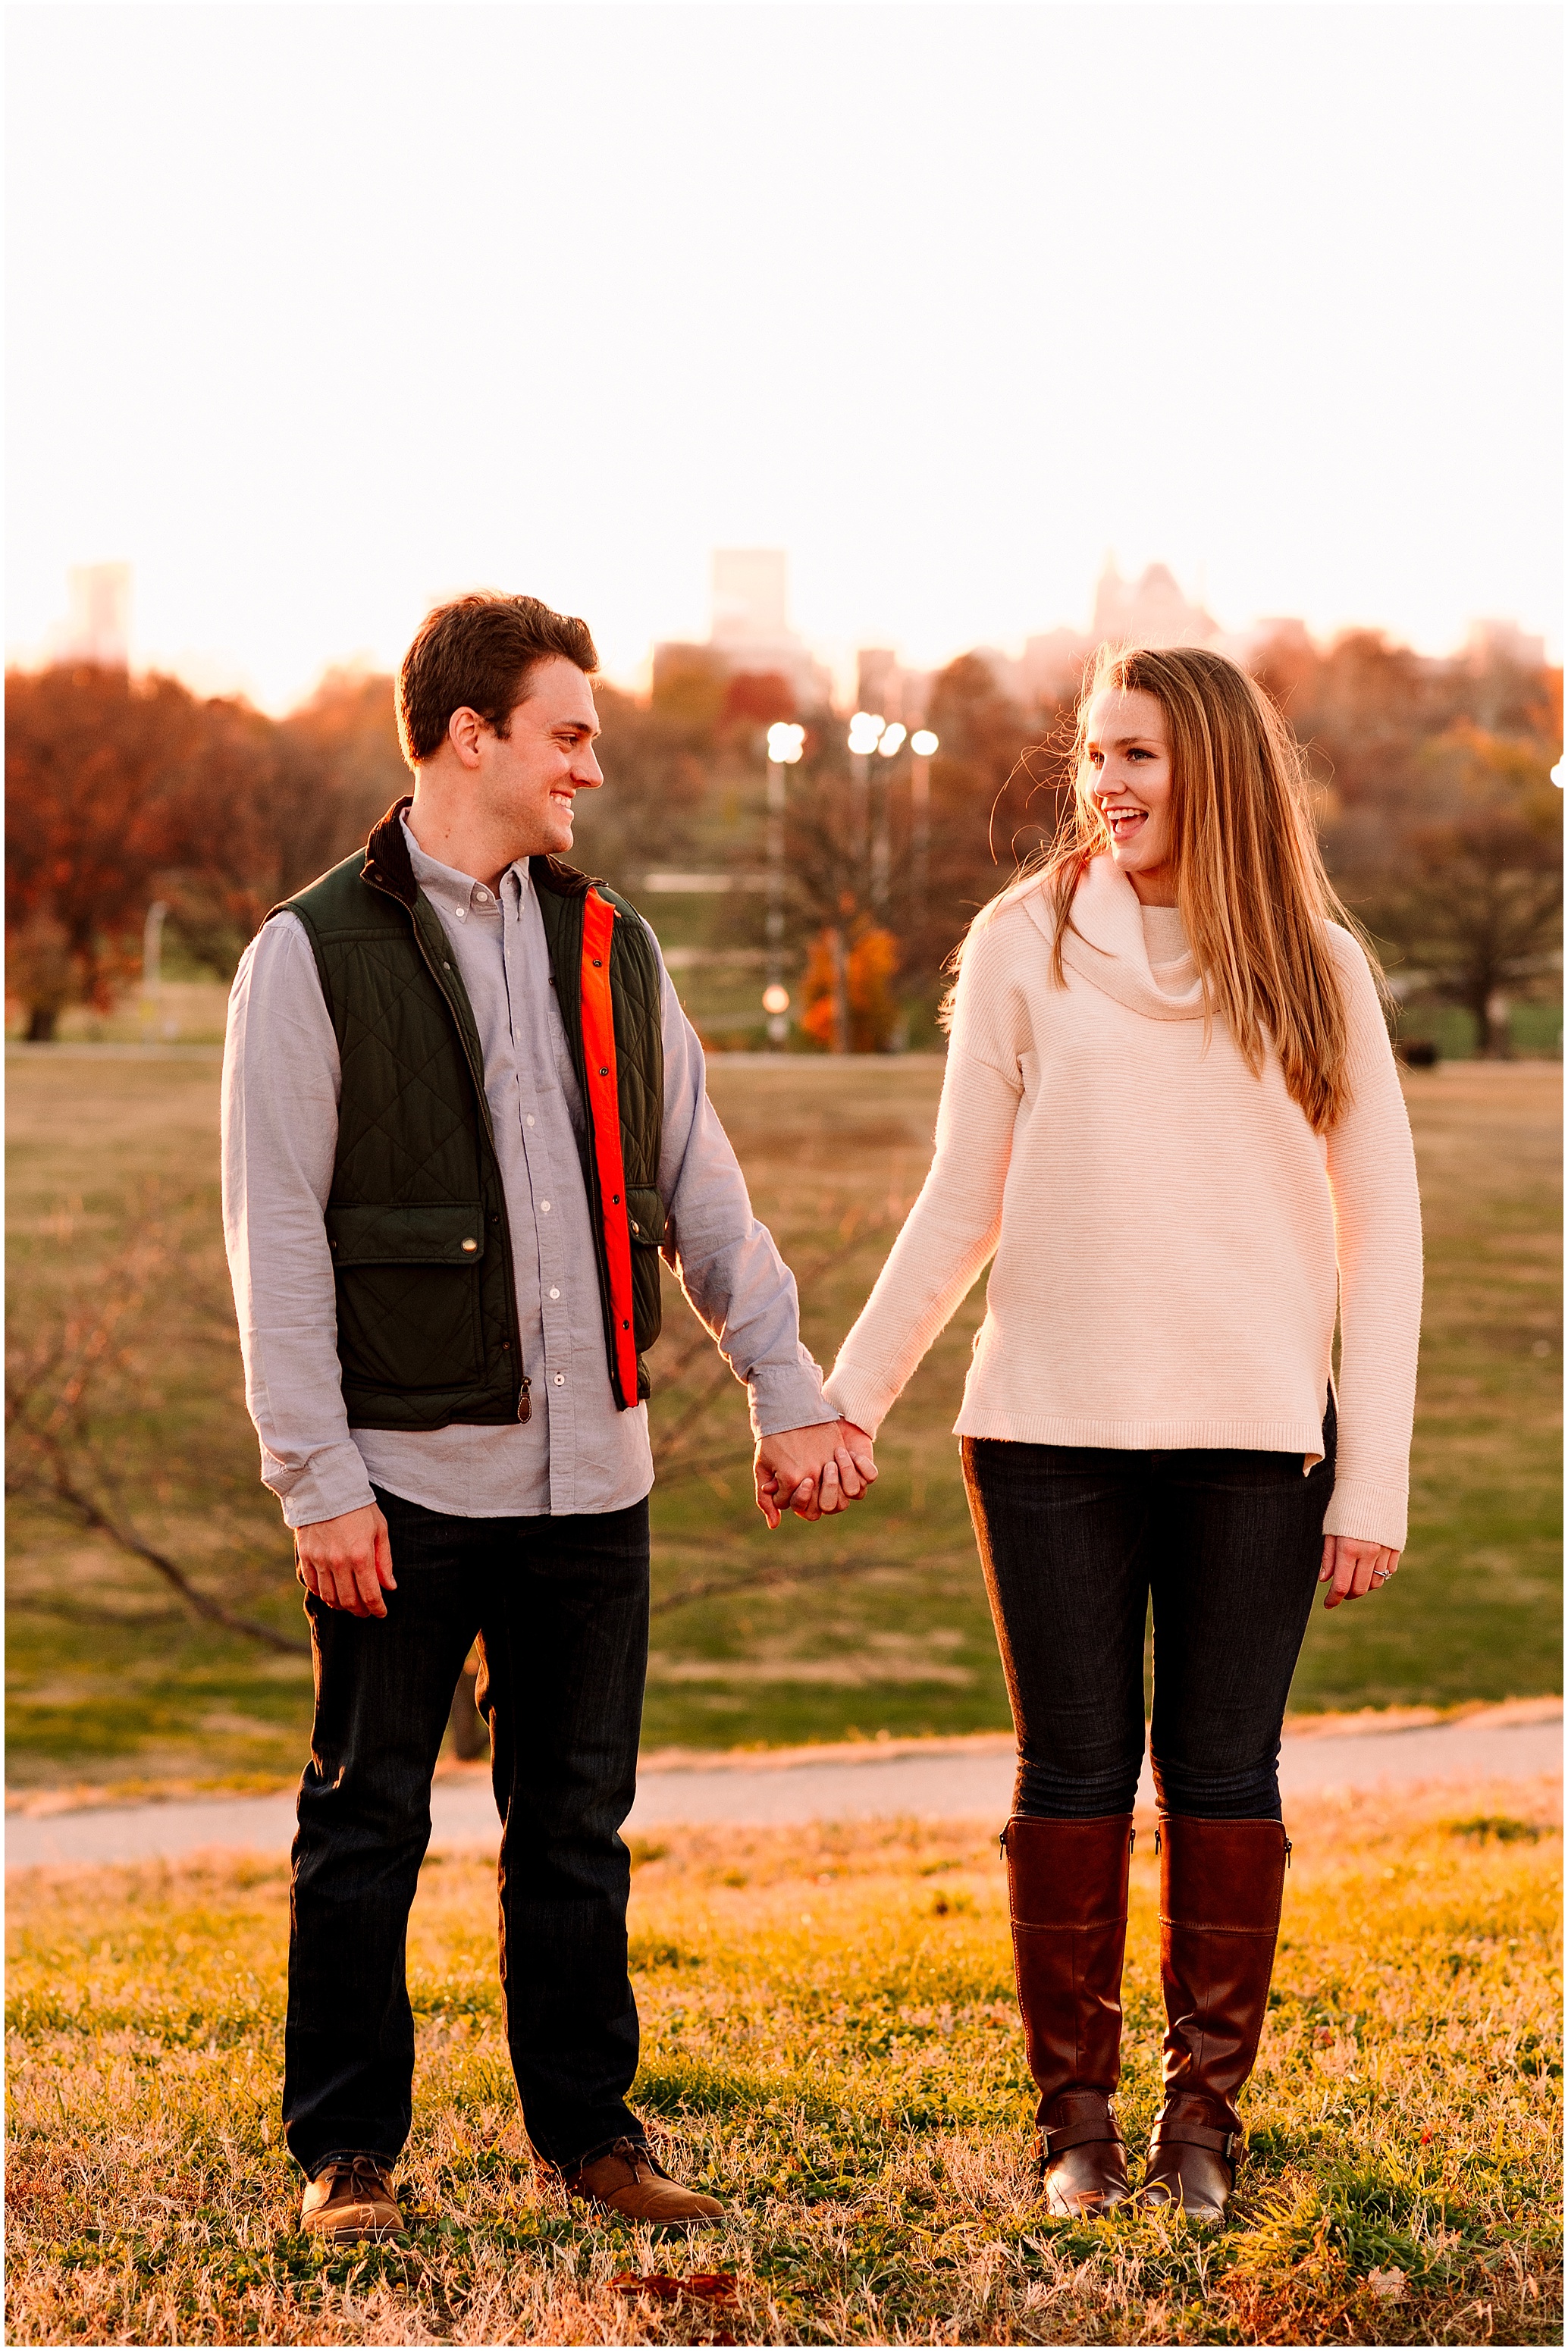 Hannah Leigh Photography Baltimore Engagement Session MD_6985.jpg